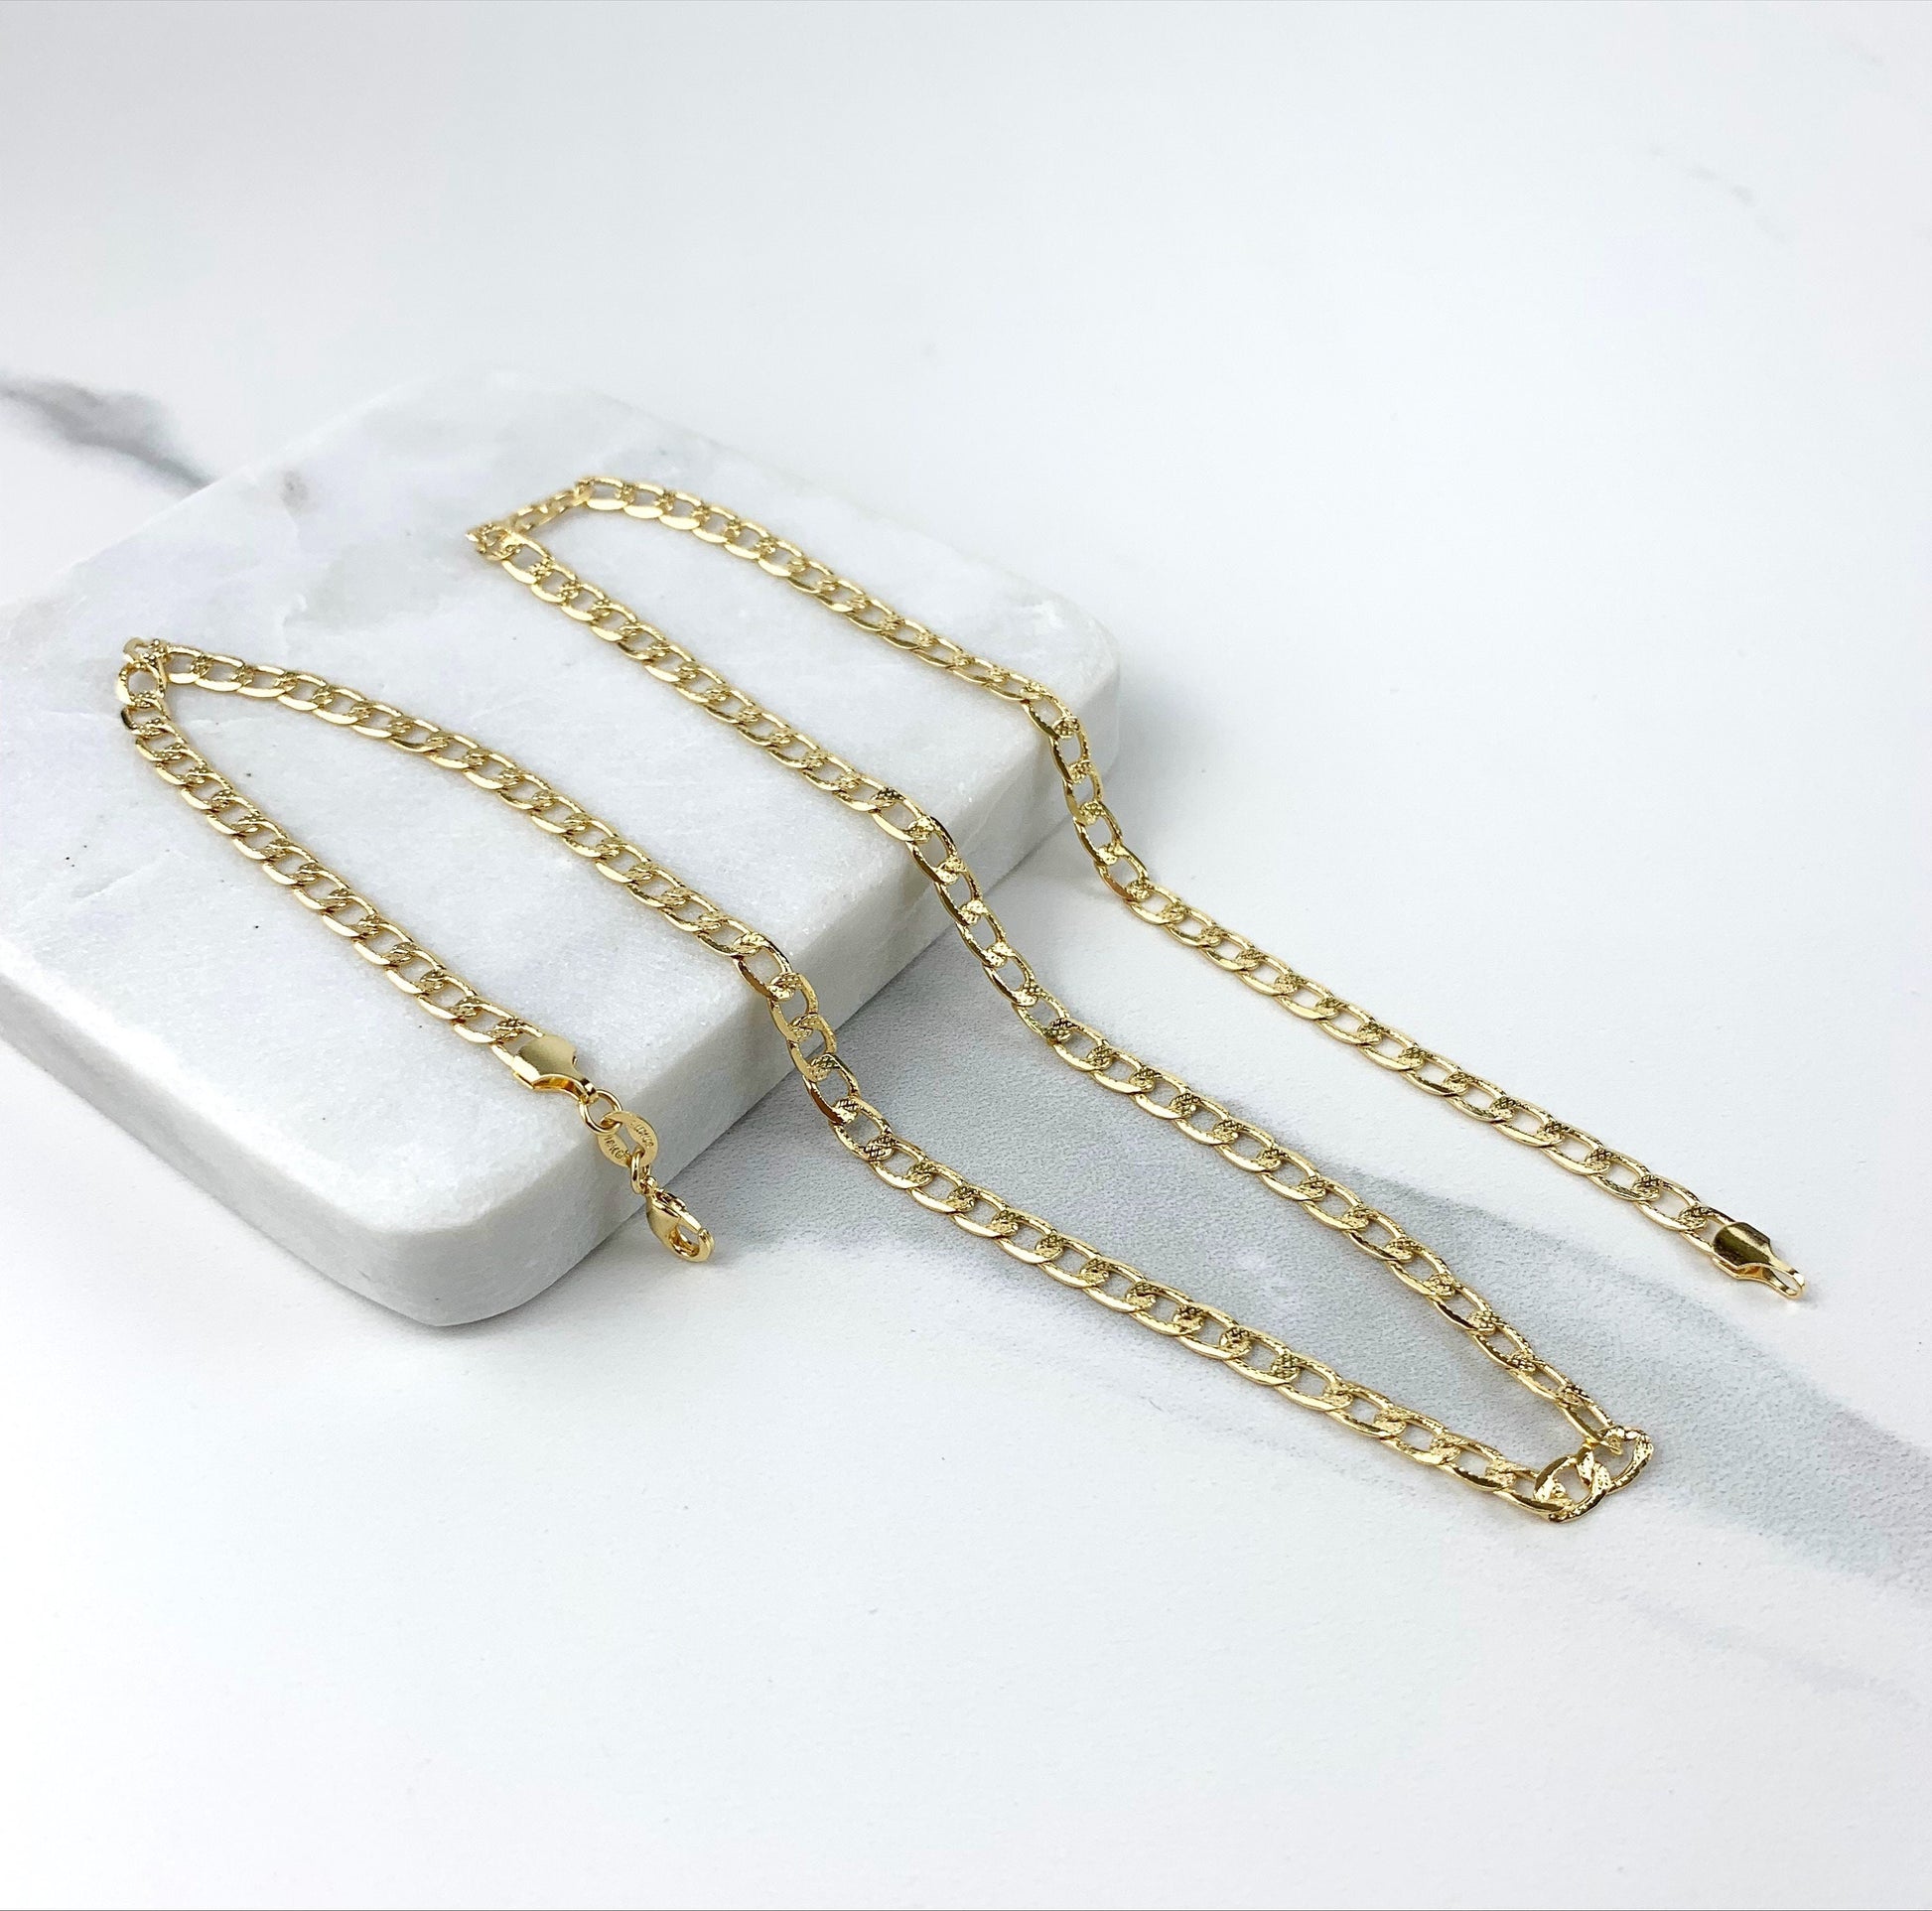 4 Mm Chain Link,necklace,gold Chain,jewelry Making Chain,wholesale